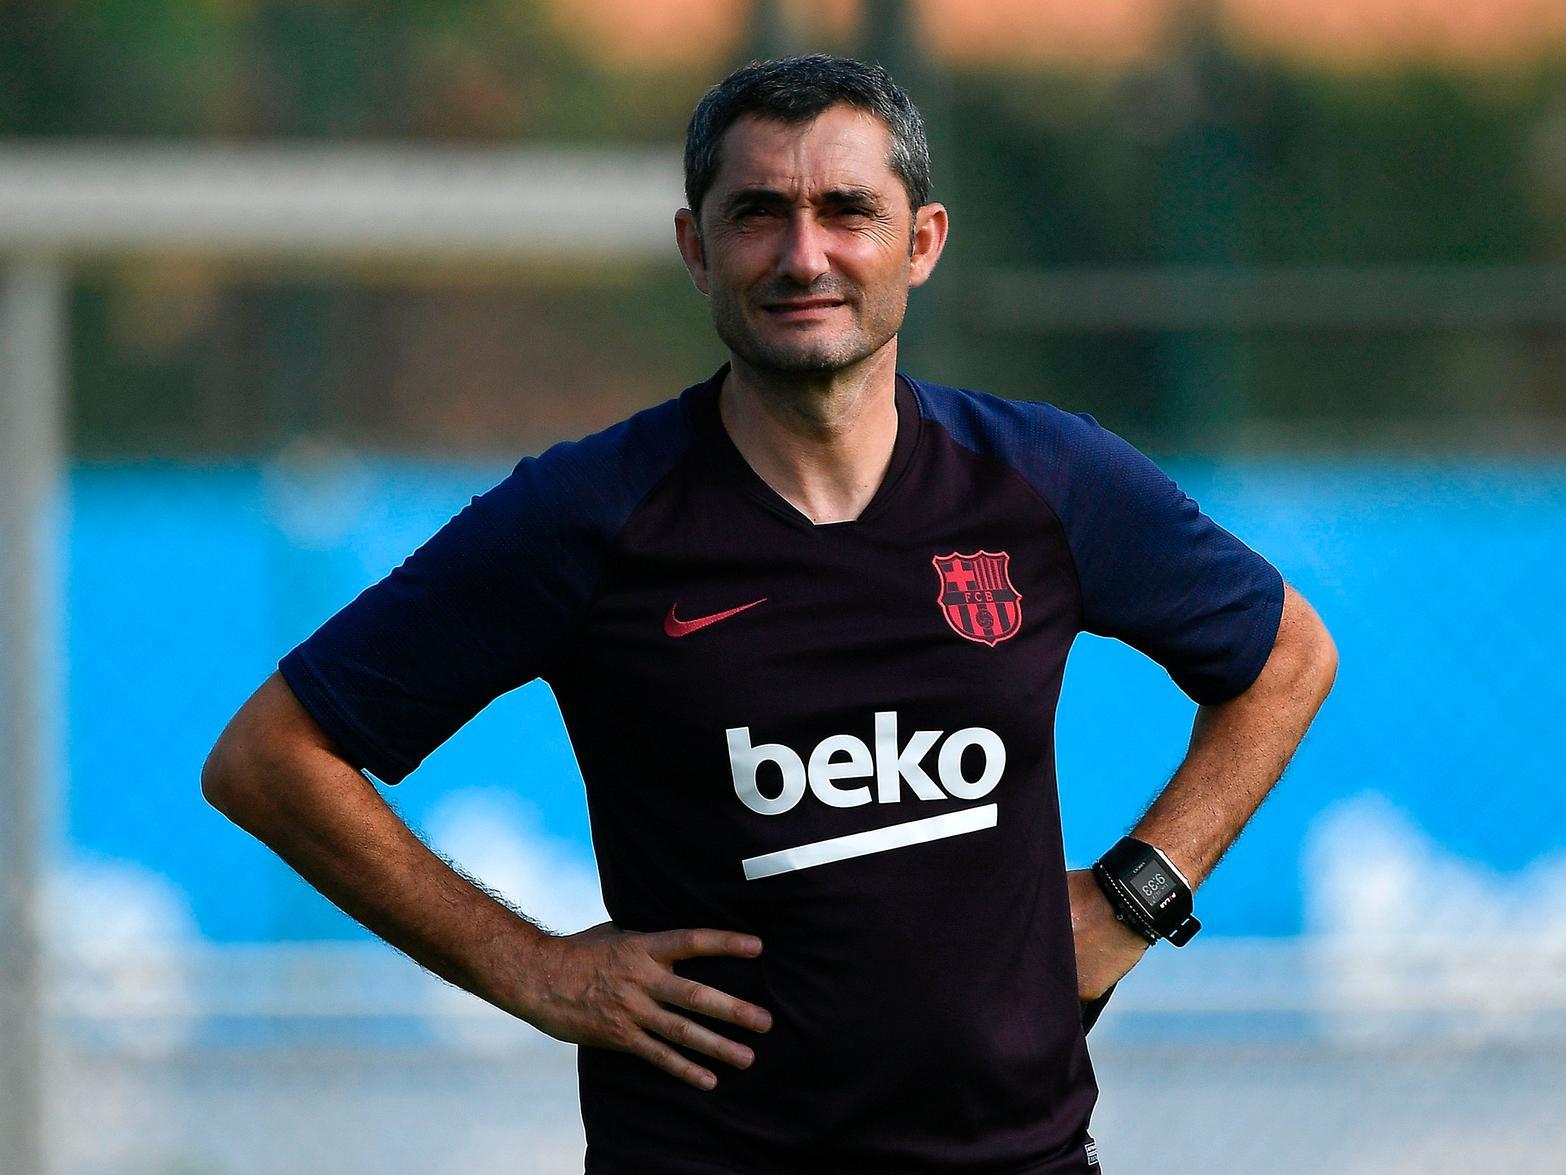 After winning the Champions League again in 2022, Klopp left for Barcelona. Ernesto Valverde moved in the opposition direction, won the Champions League in 2023, and then led an invincible league title win in 2024! Superb.